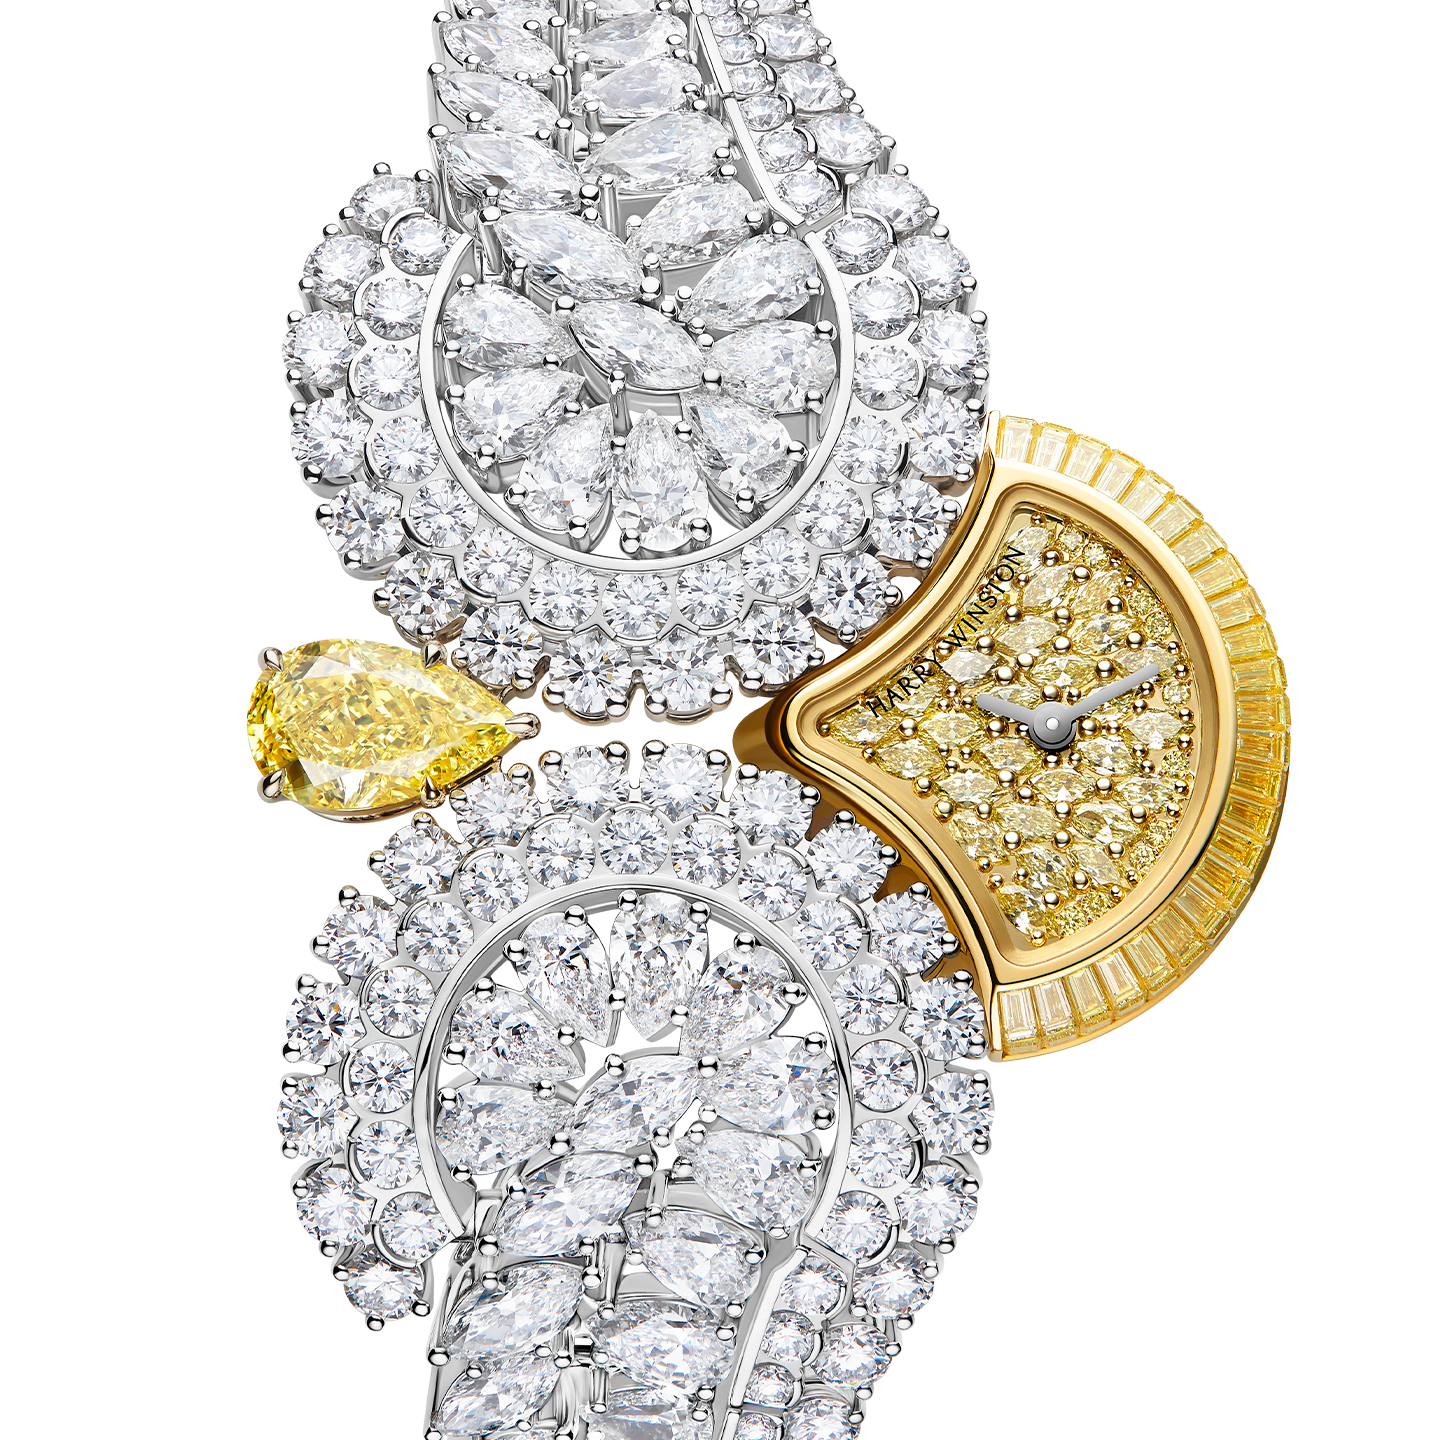 How Much is a Harry Winston Watch at R&J Jewelry and Loan?